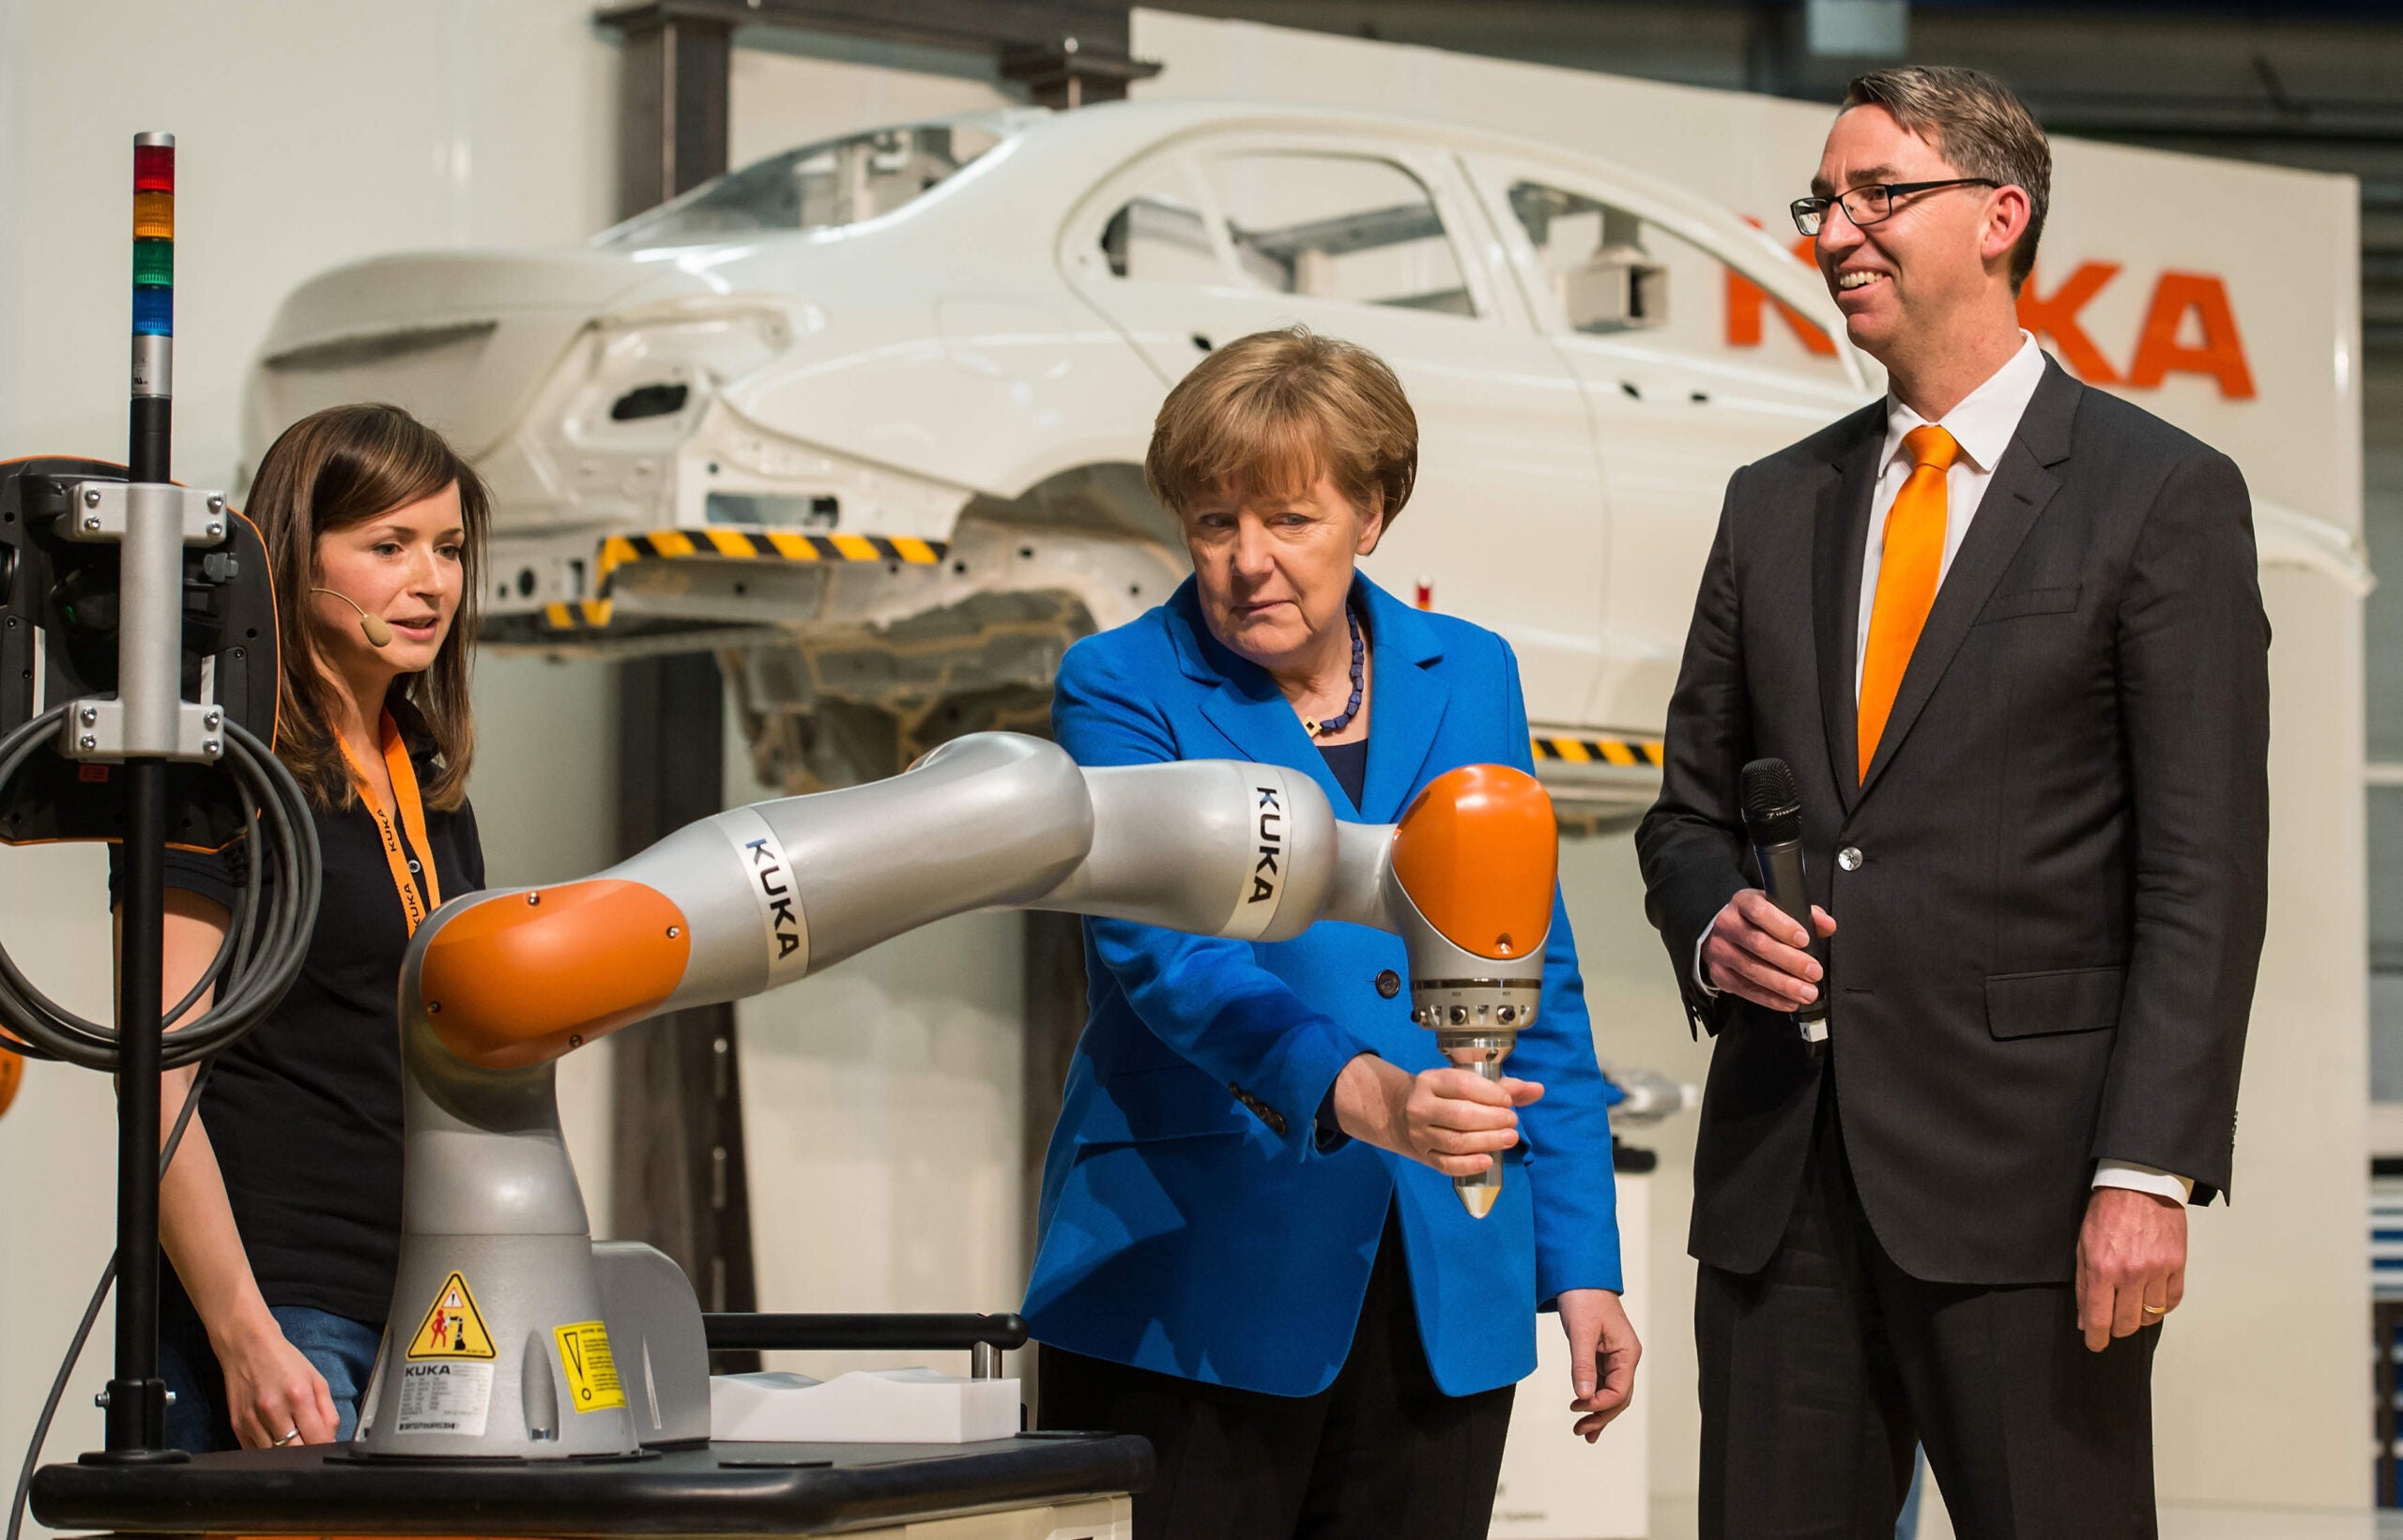 Germany’s political stability could be threatened by automation